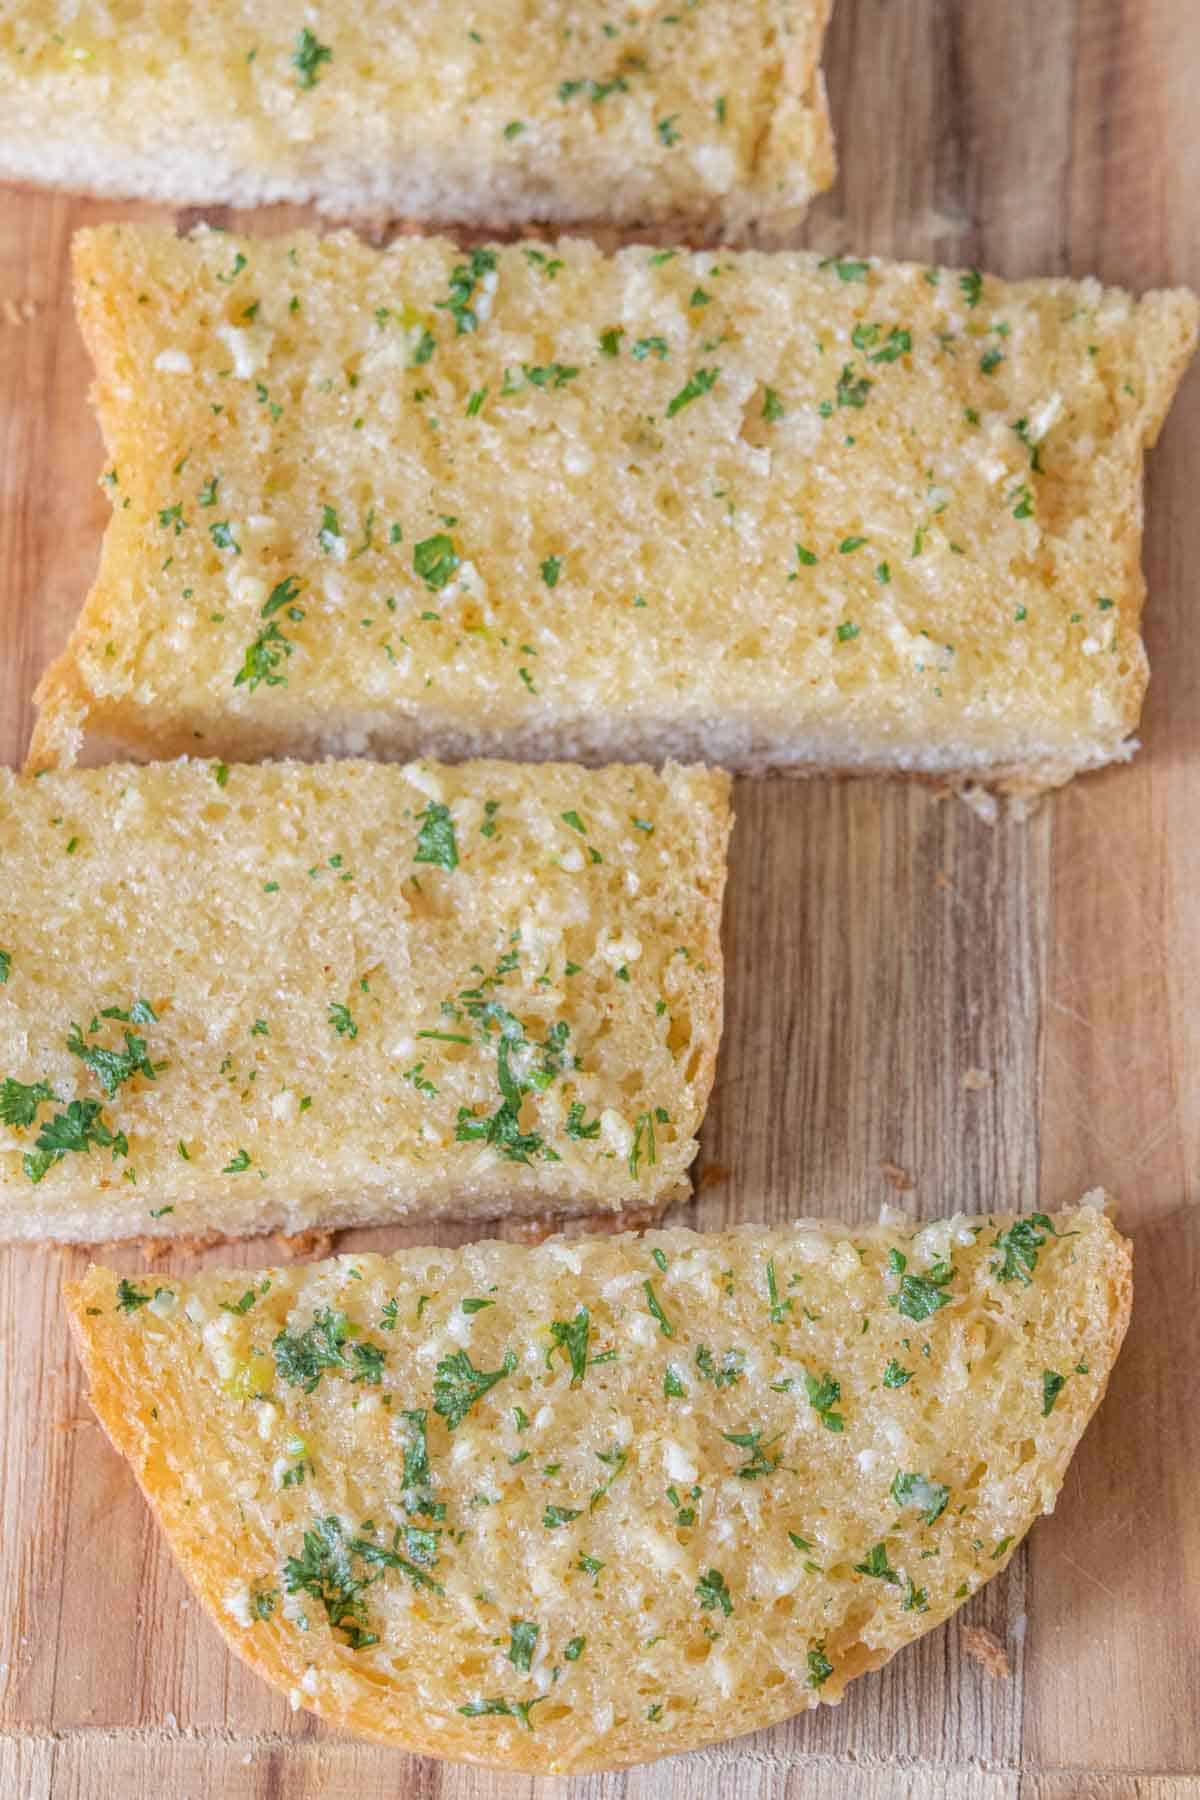 Pieces of homemade garlic bread on a cutting board.